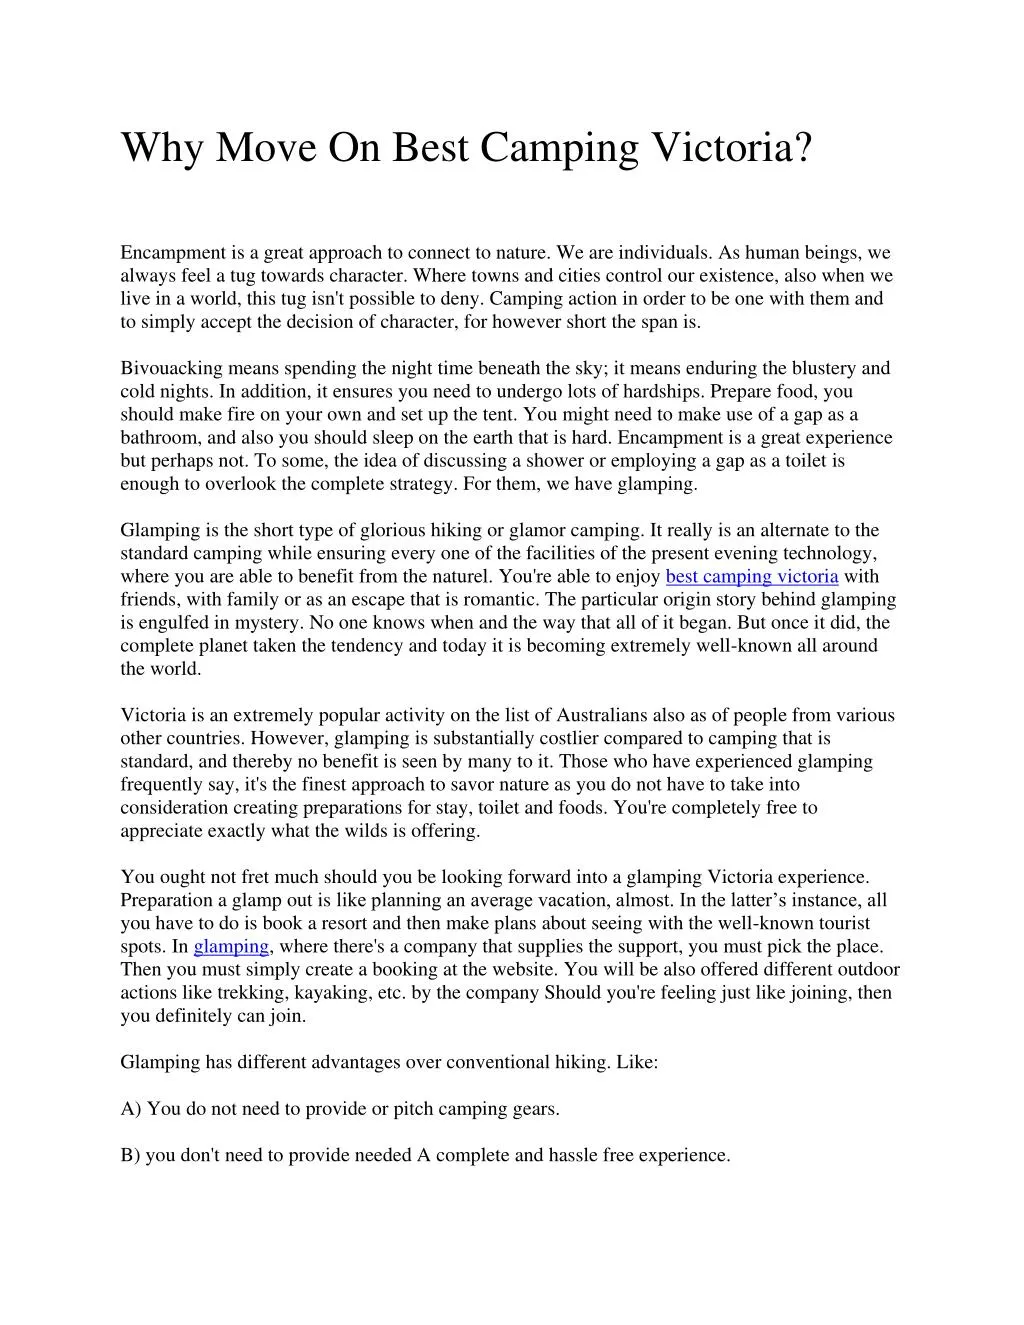 why move on best camping victoria